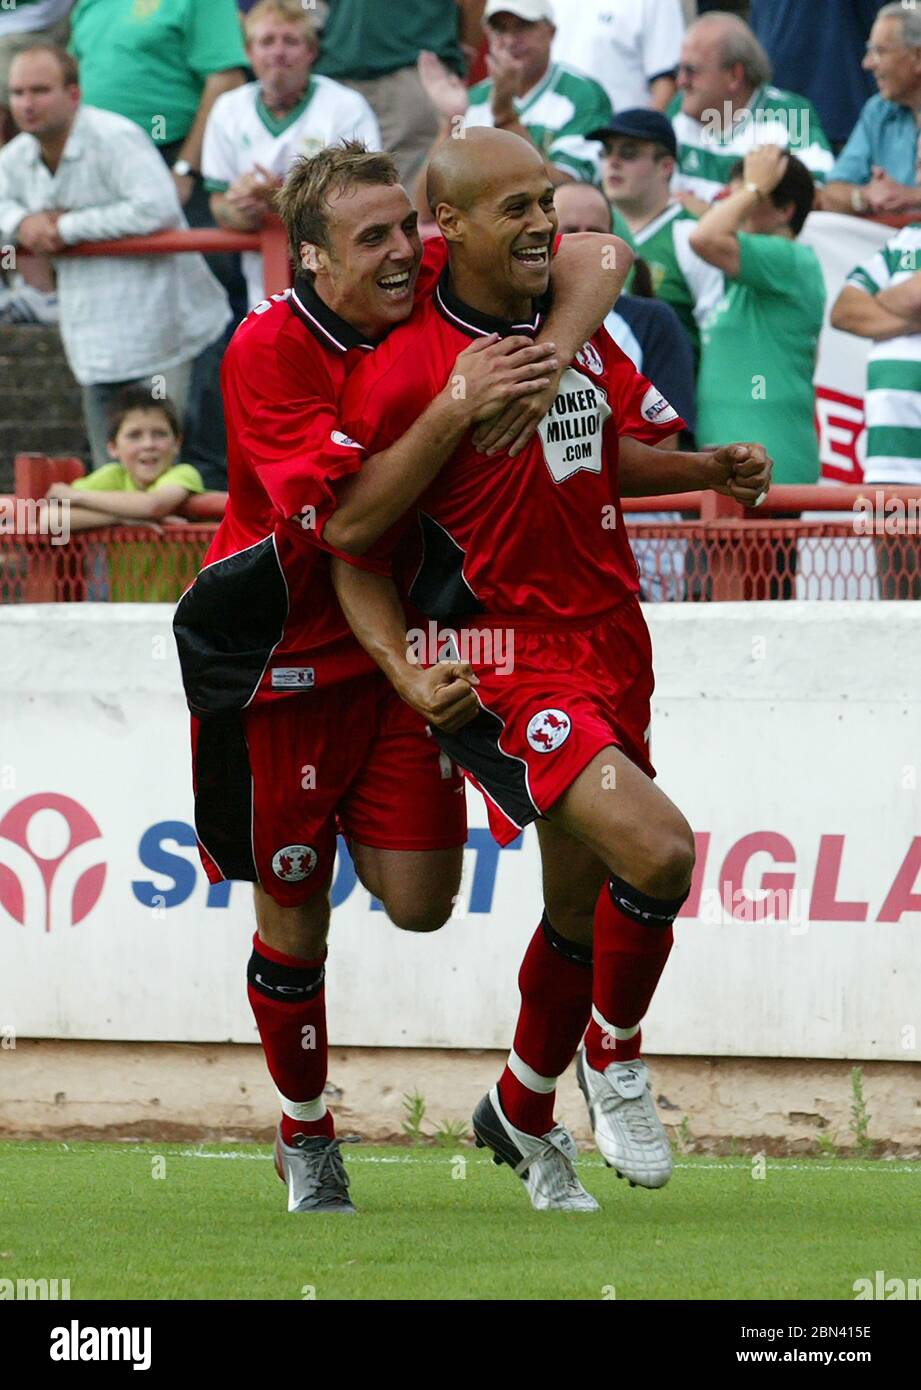 LONDON, UK. AUGUST 23: Lee Thorpe of Leyton Orient celebrates his goal  during League Division 3 between Leyton Orient and Yeovil Town at Matchroom st Stock Photo